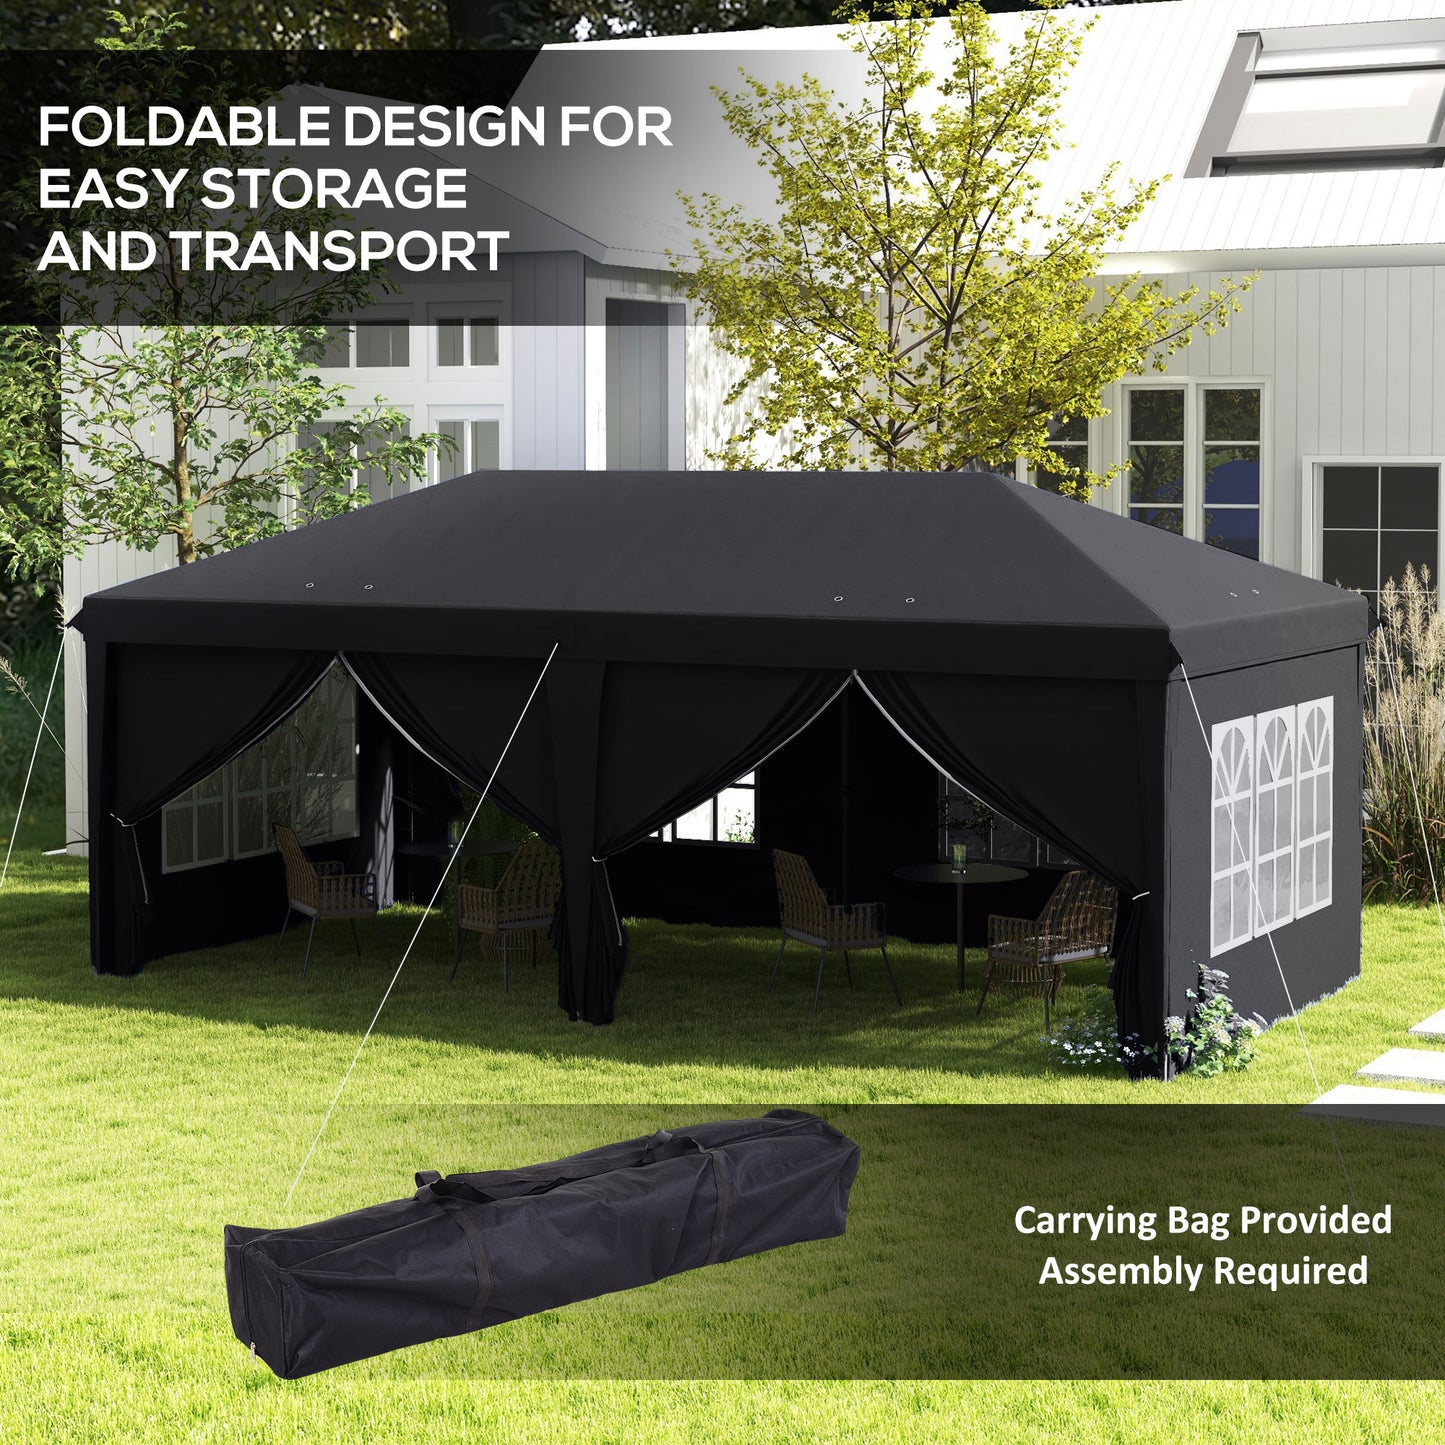 Outsunny 3 x 6 m Pop Up Gazebo with Sides and Windows, Height Adjustable Party Tent with Storage Bag for Garden, Camping, Event, Grey